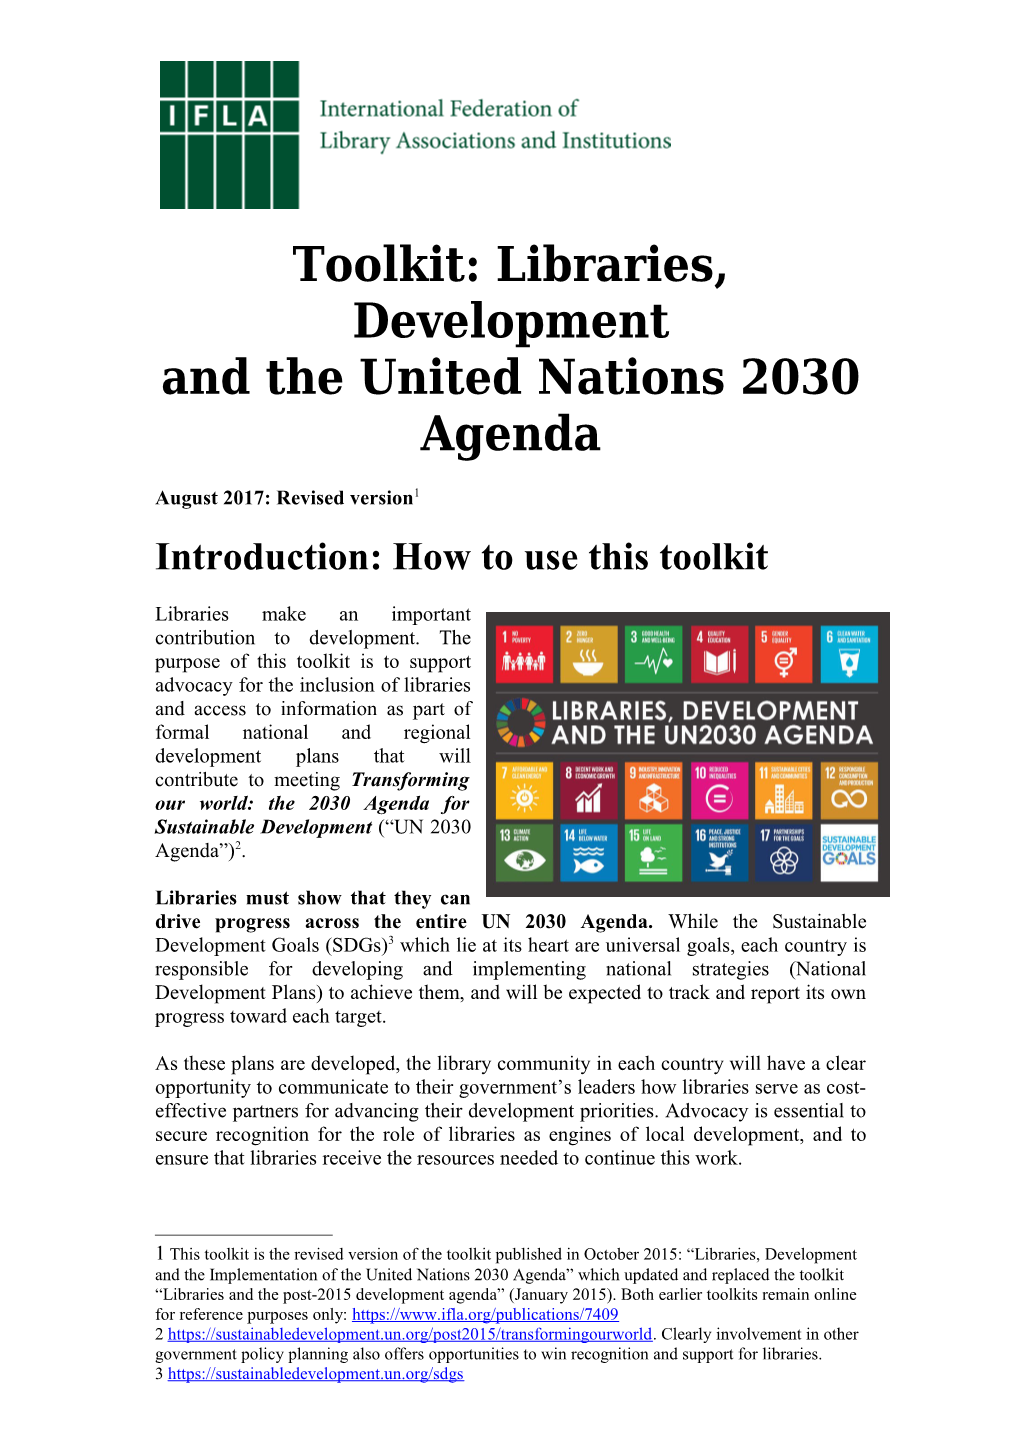 Toolkit: Libraries, Development and the United Nations 2030 Agenda